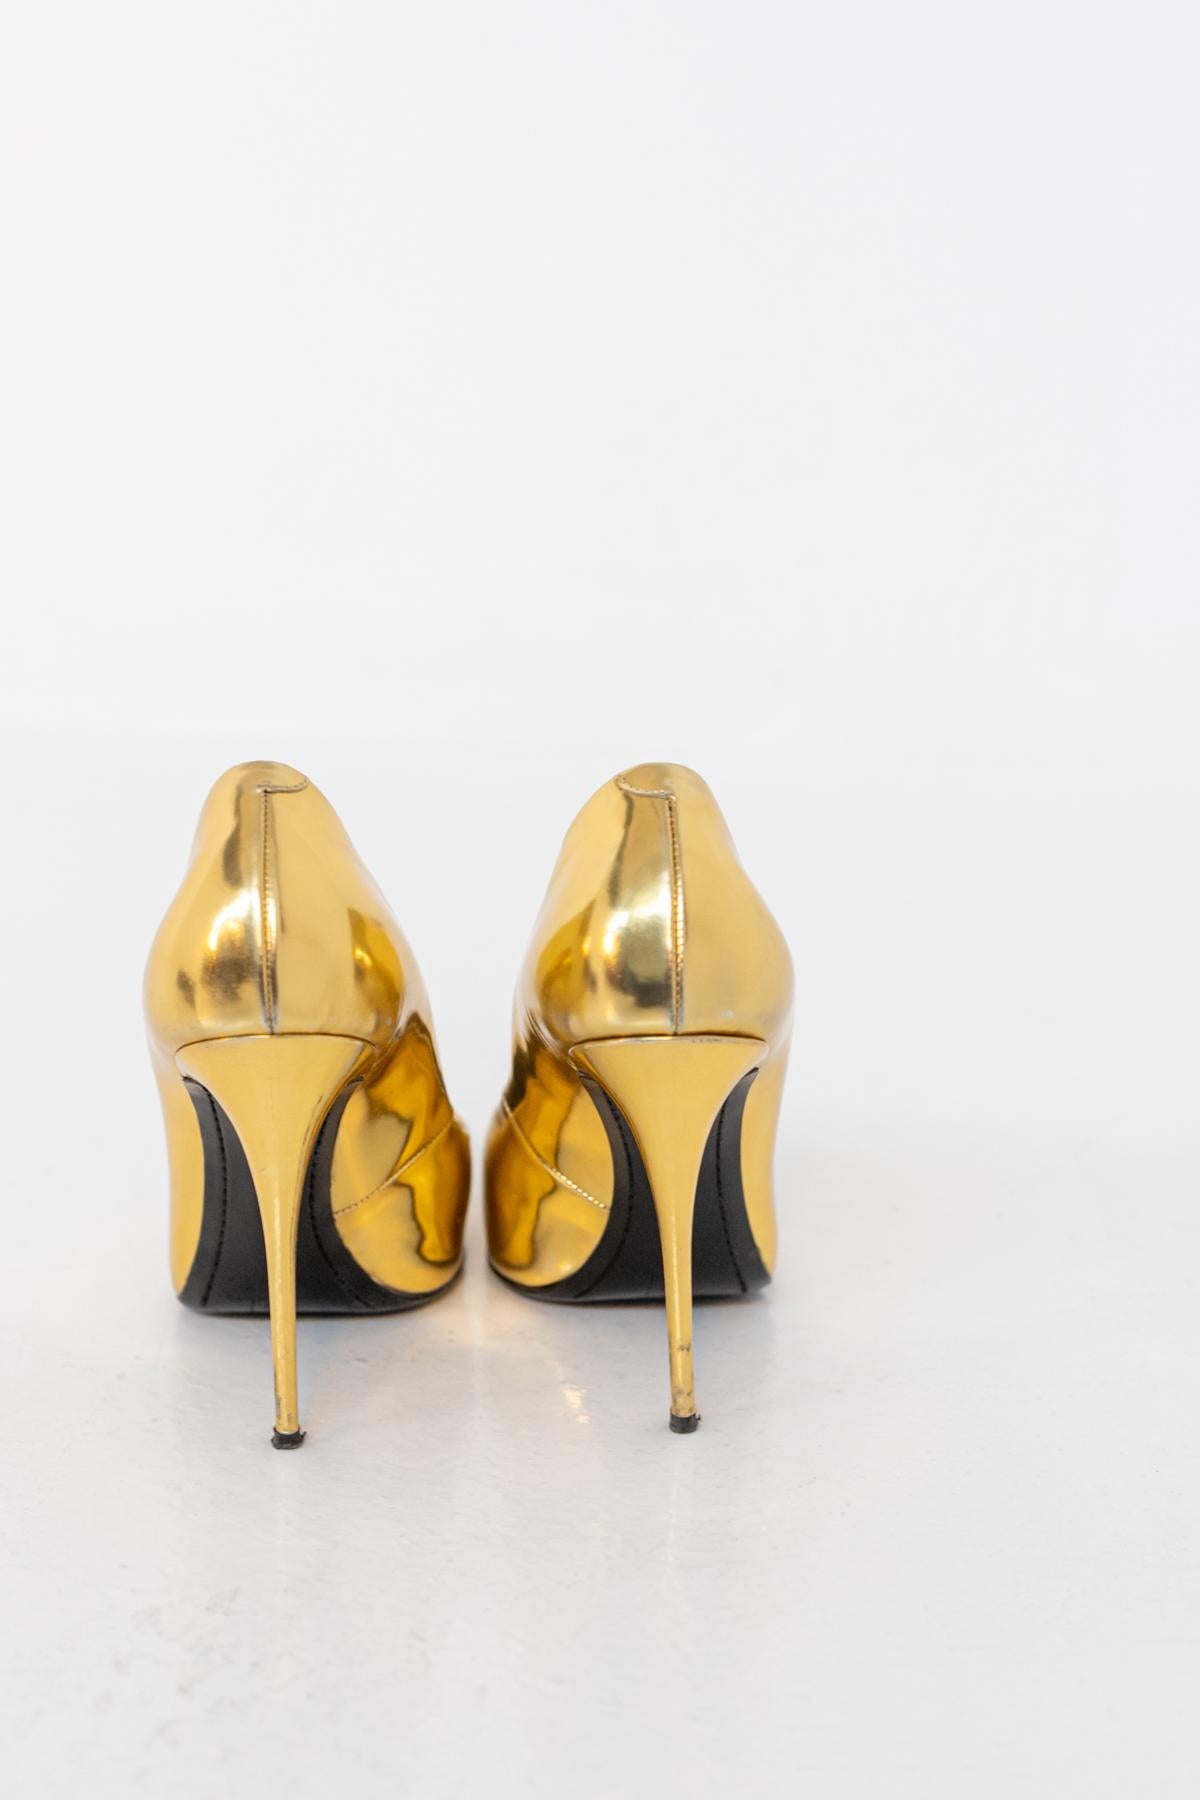 Elegant and glamorous pairs of women's shoes in gold leather. The decoltè is a precious 12 cm stiletto heel. The foot of the shoe is pointed with an elegant decoltè that makes the sole of the foot very harmonious and elegant. Used only 3 times .